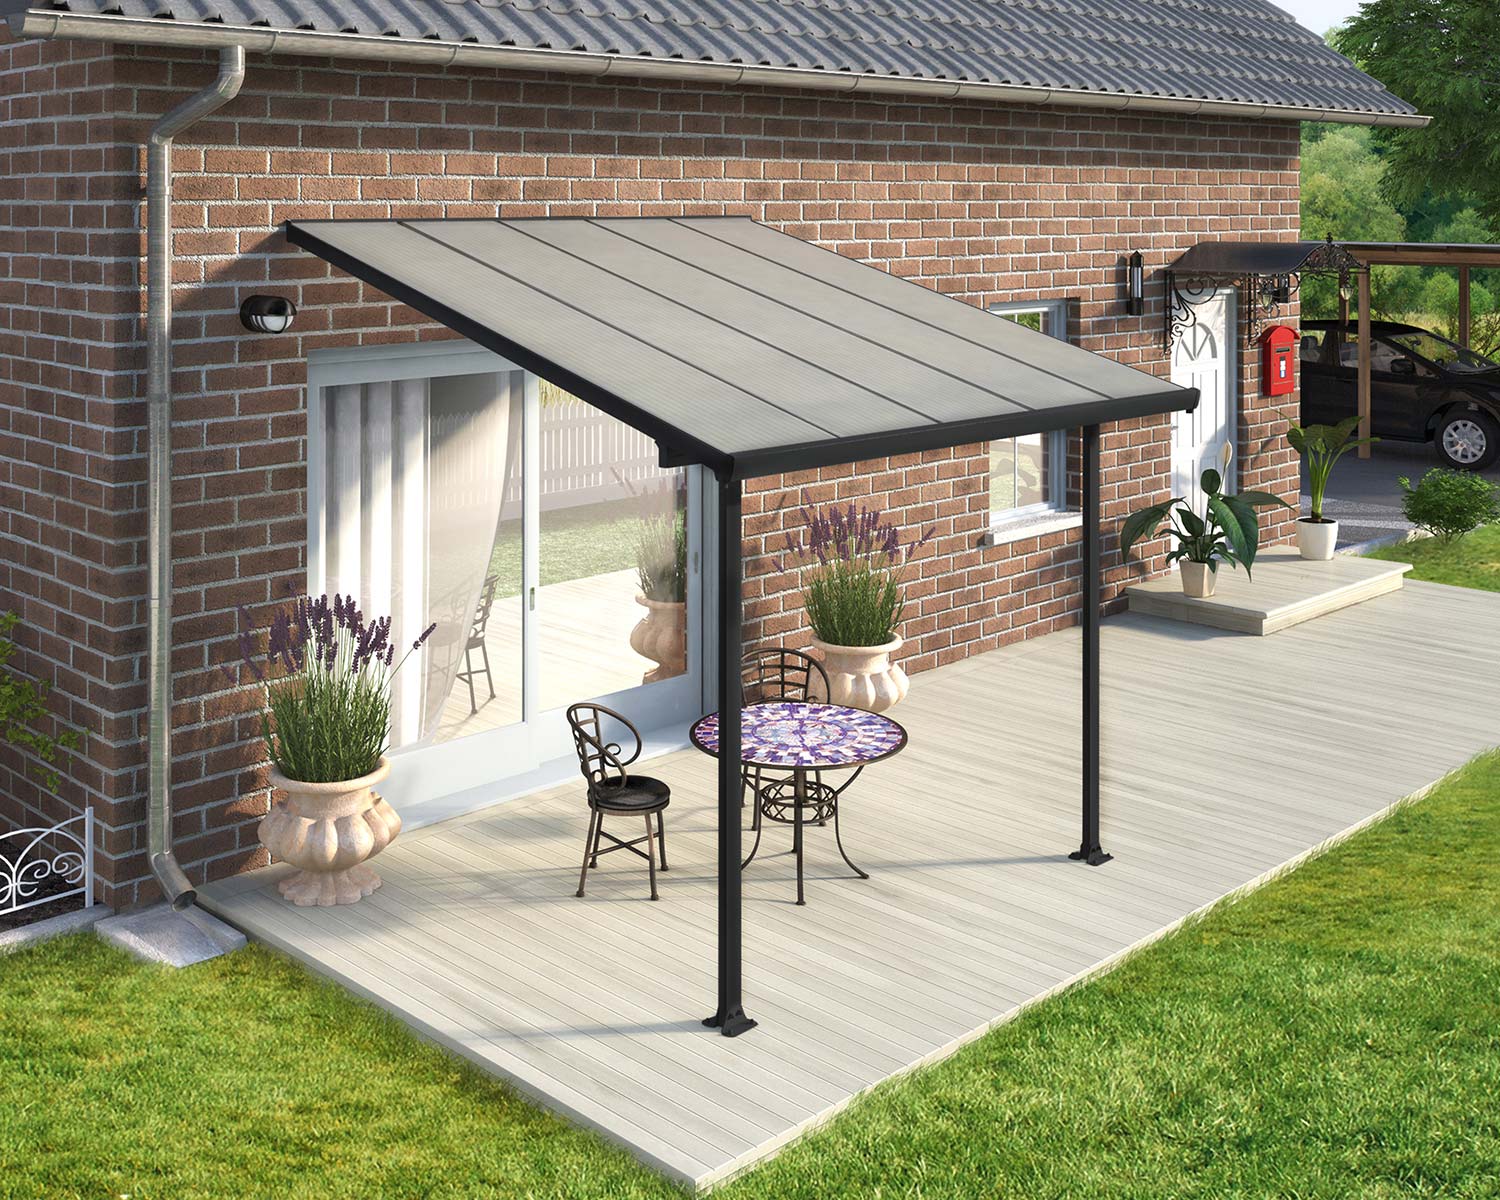 Feria 10 ft. x 10 ft. Grey Aluminium Patio Cover with 2 Posts and Clear Polycarbonate Roof Panels Attached to House that Covers Patio Outdoor Furniture